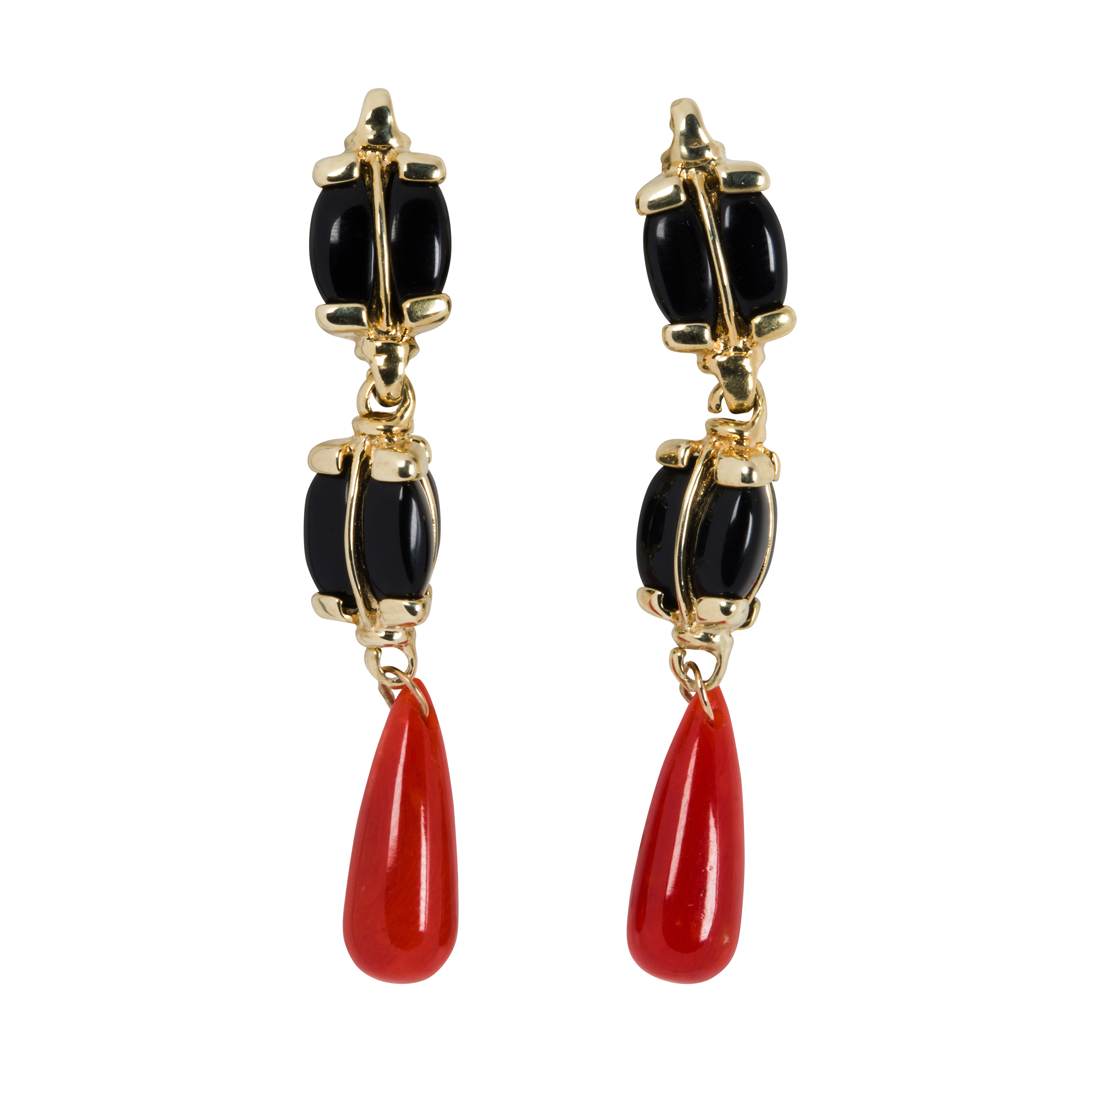 A PAIR OF CORAL, ONYX AND 14K GOLD